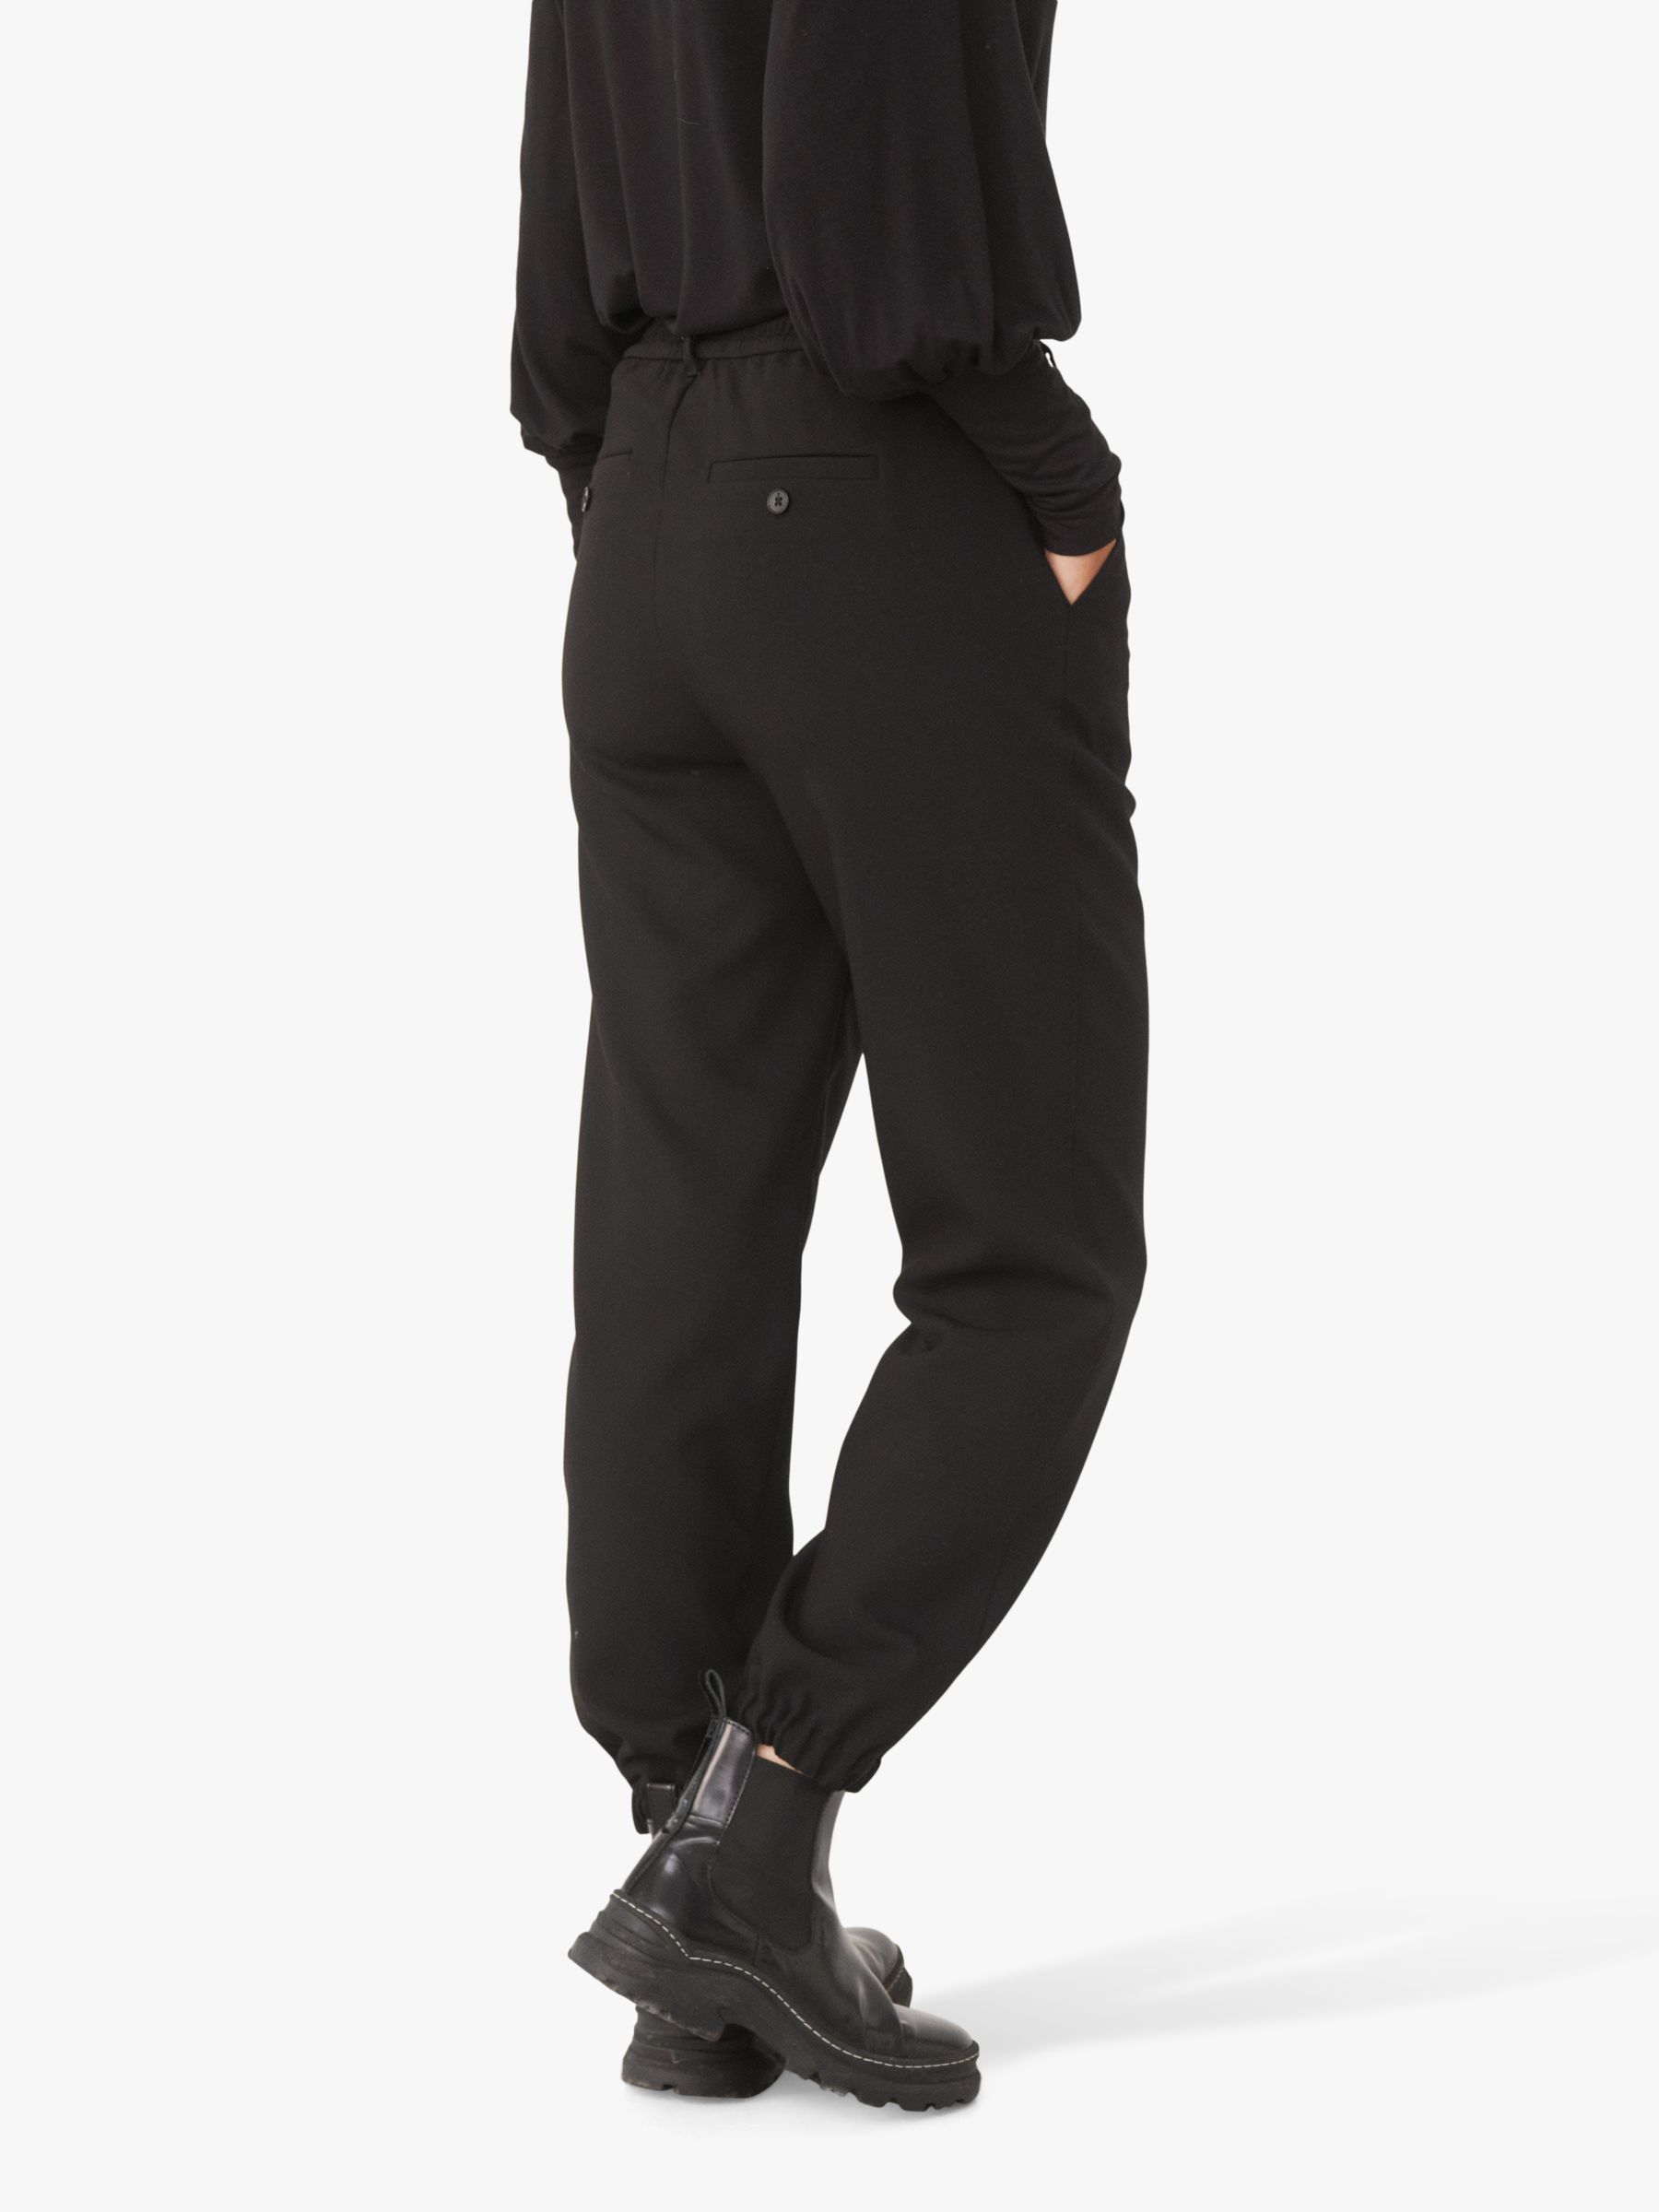 Buy Part Two Katja Tapered Trousers, Black Online at johnlewis.com